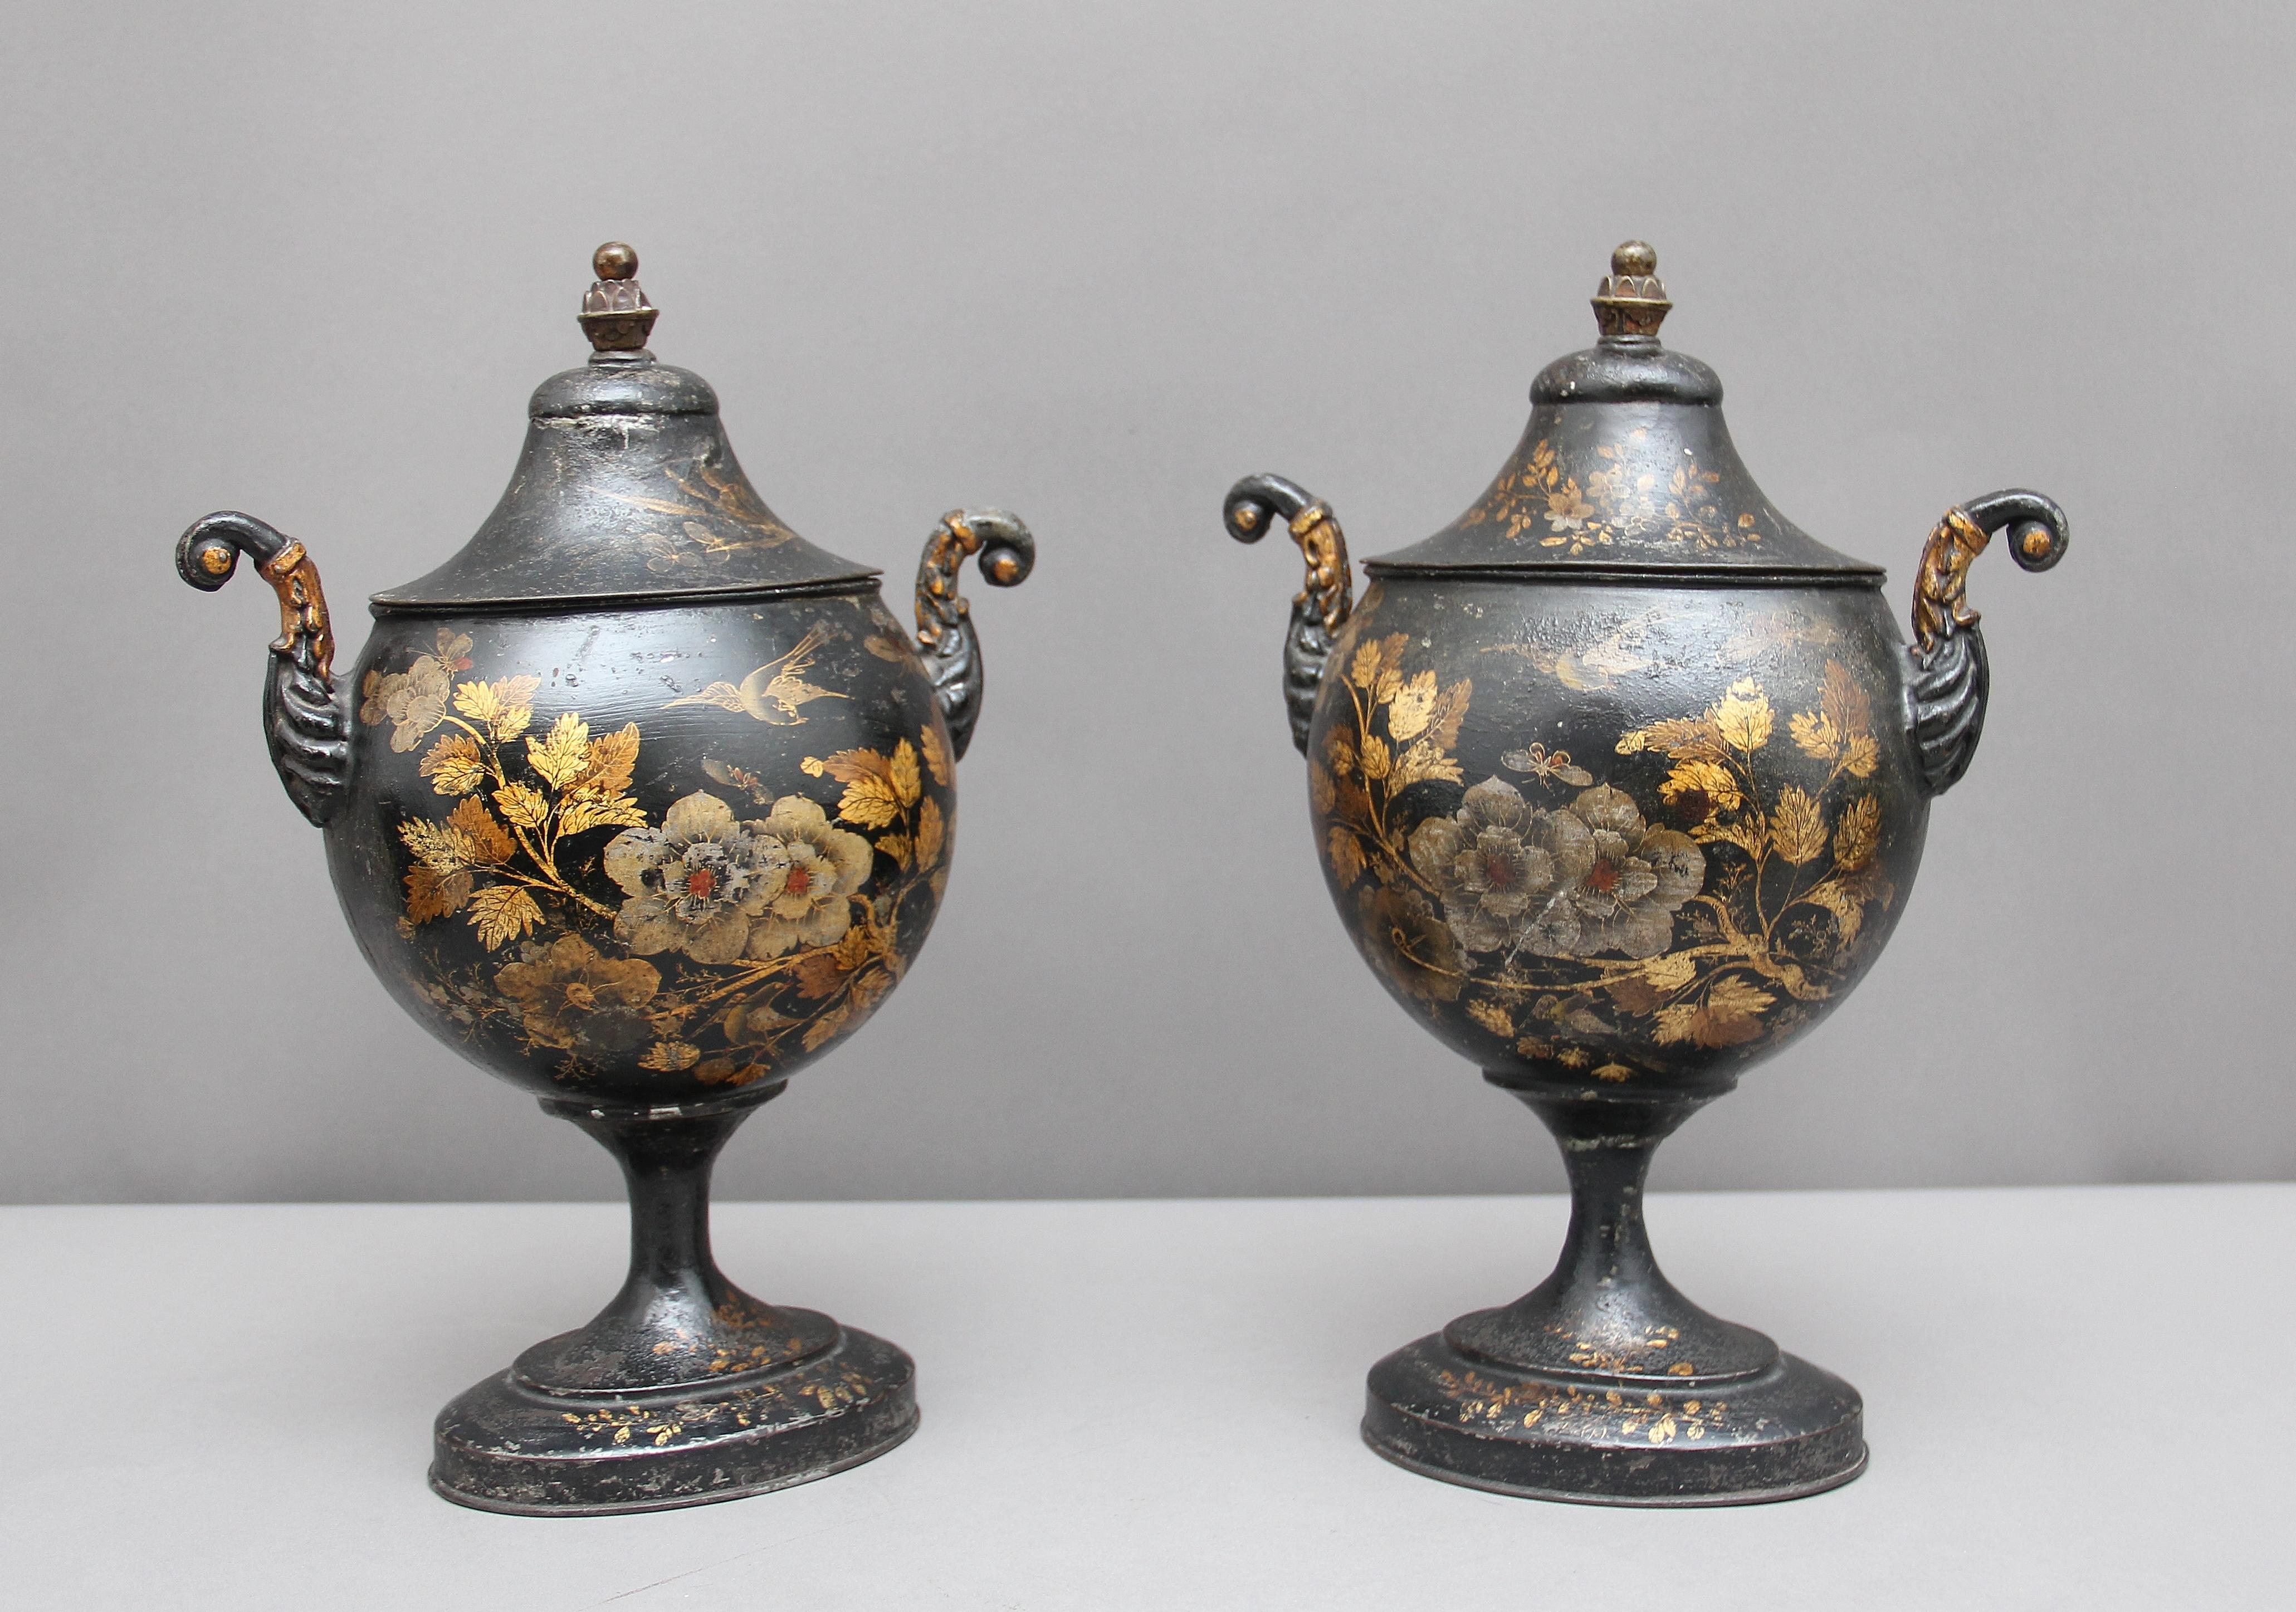 A rare pair of early 19th century toleware chestnut urns, decorated with flowers, birds and butterfly’s in lovely colors, standing on oval bases and with scrolling arms, the lids topped with brass finials. Hot chestnut urns were popular in the late